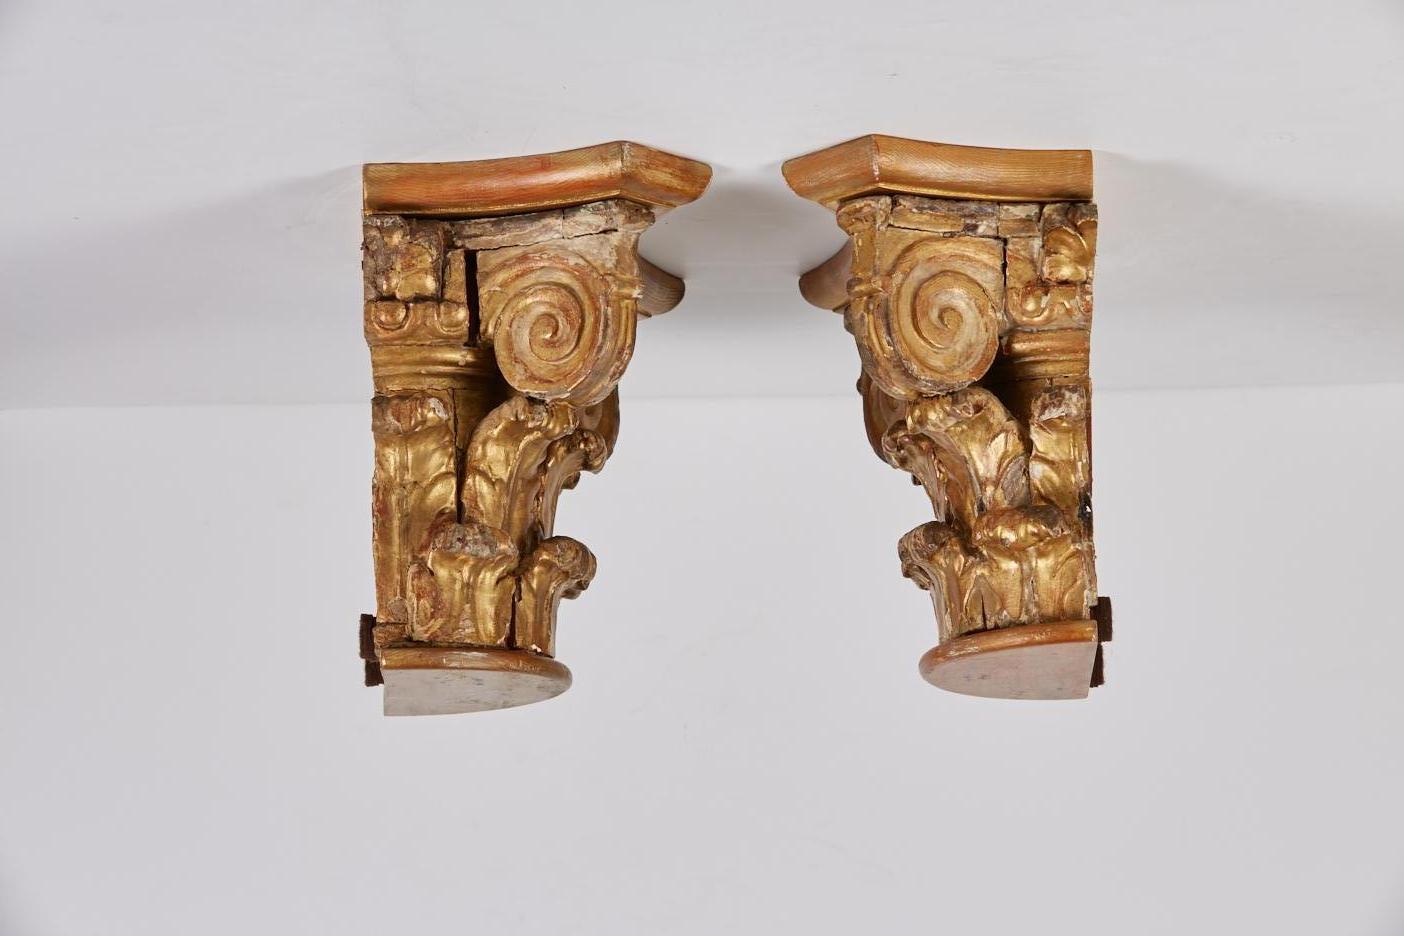 Pair of antique gilt carved wood Corinthian half capitals converted as ornamental bracket shelves with the addition of half round elements at the top and bottom of each.